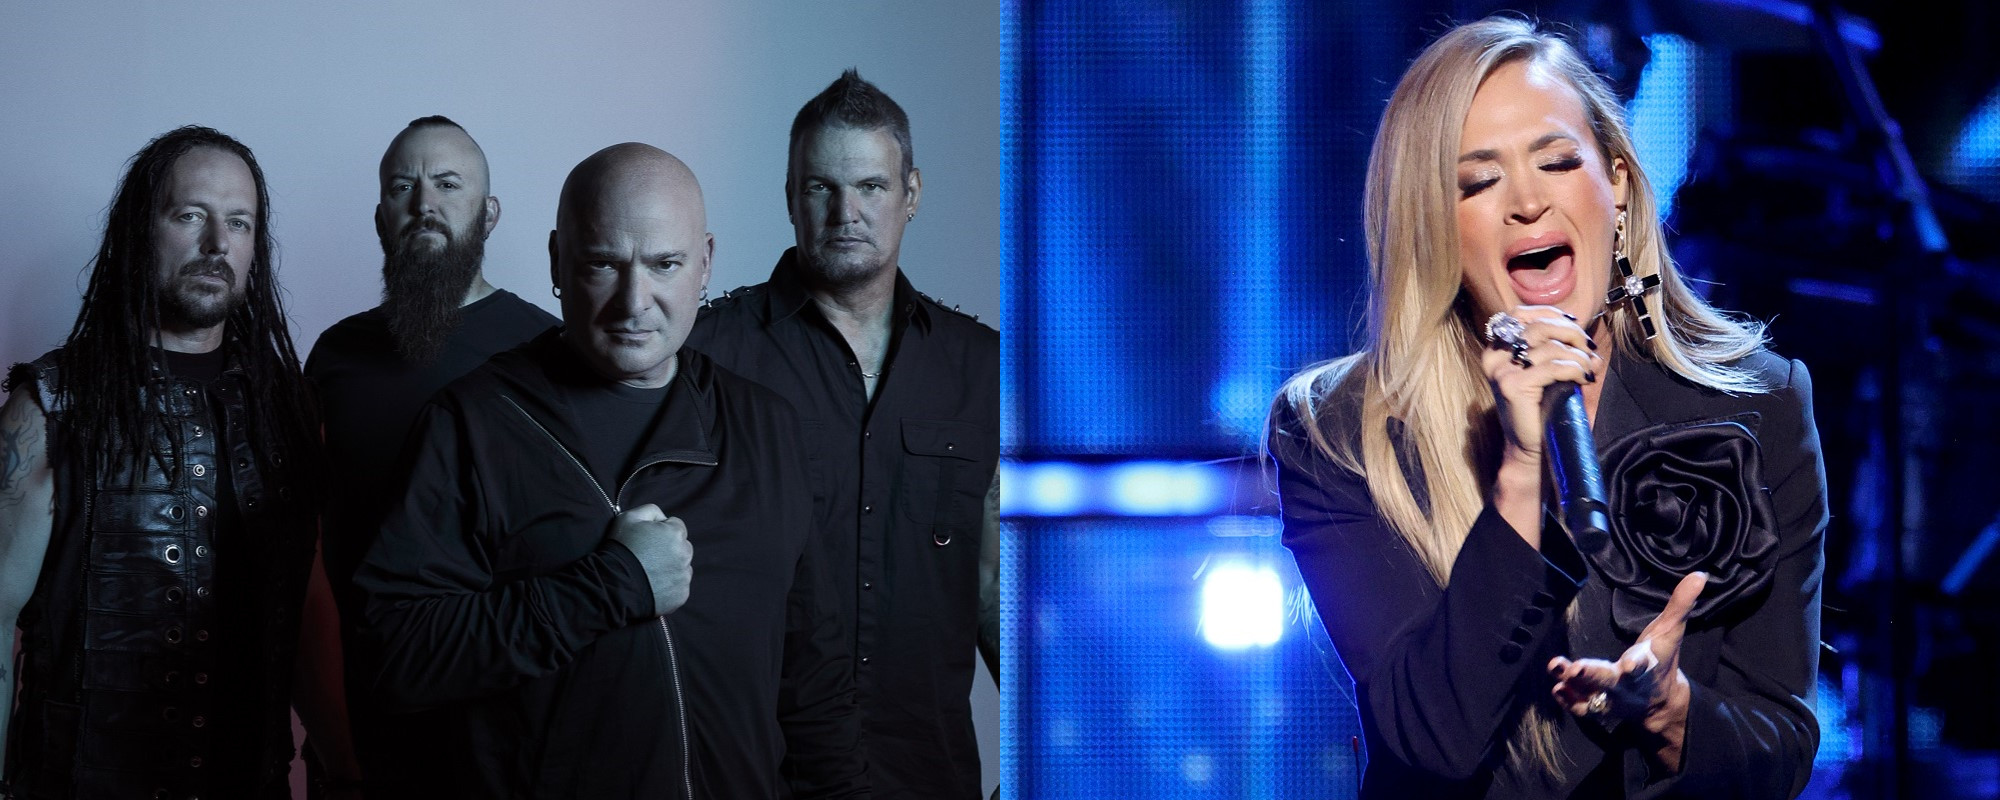 Disturbed’s David Draiman Pleads With Carrie Underwood to “Rock” with Him at Band’s Nashville Show